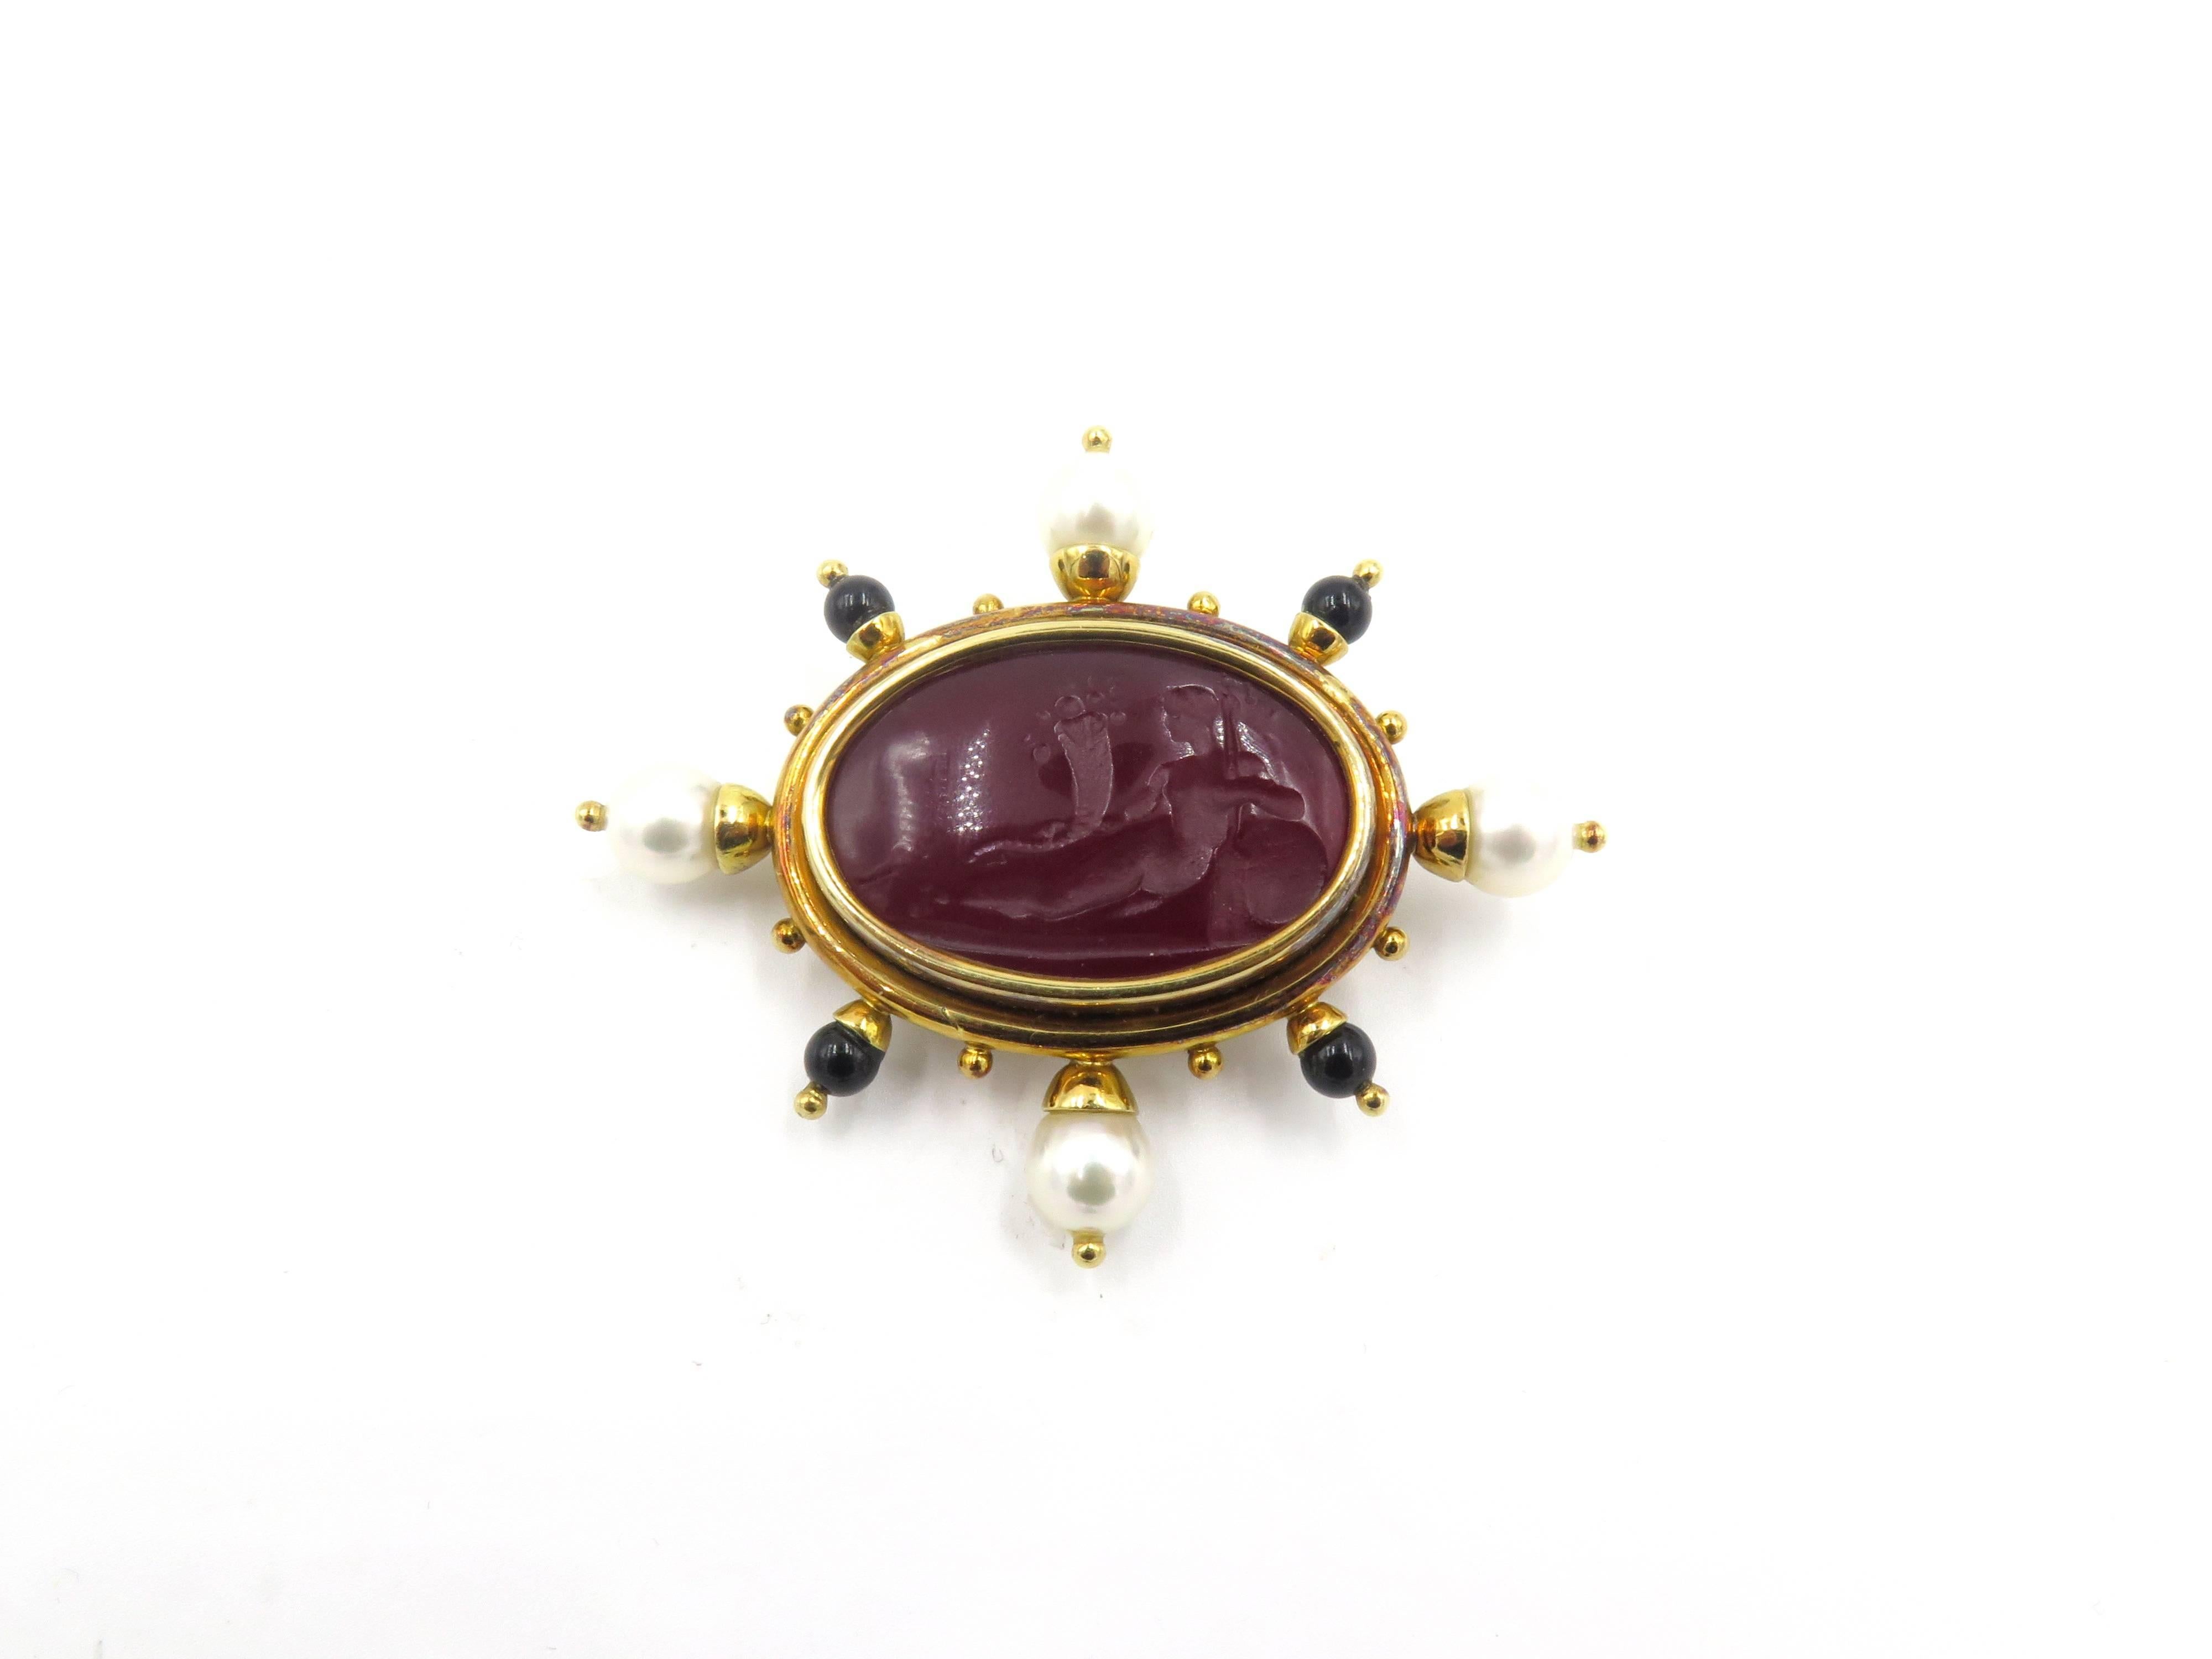 An 18 karat yellow gold, red Venetian glass, mother of pearl, cultured pearl and onyx brooch. Elizabeth Locke. Set with an oval red Venetian glass intaglio depicting the goddess Demeter, backed by mother of pearl, within a polished gold surround,